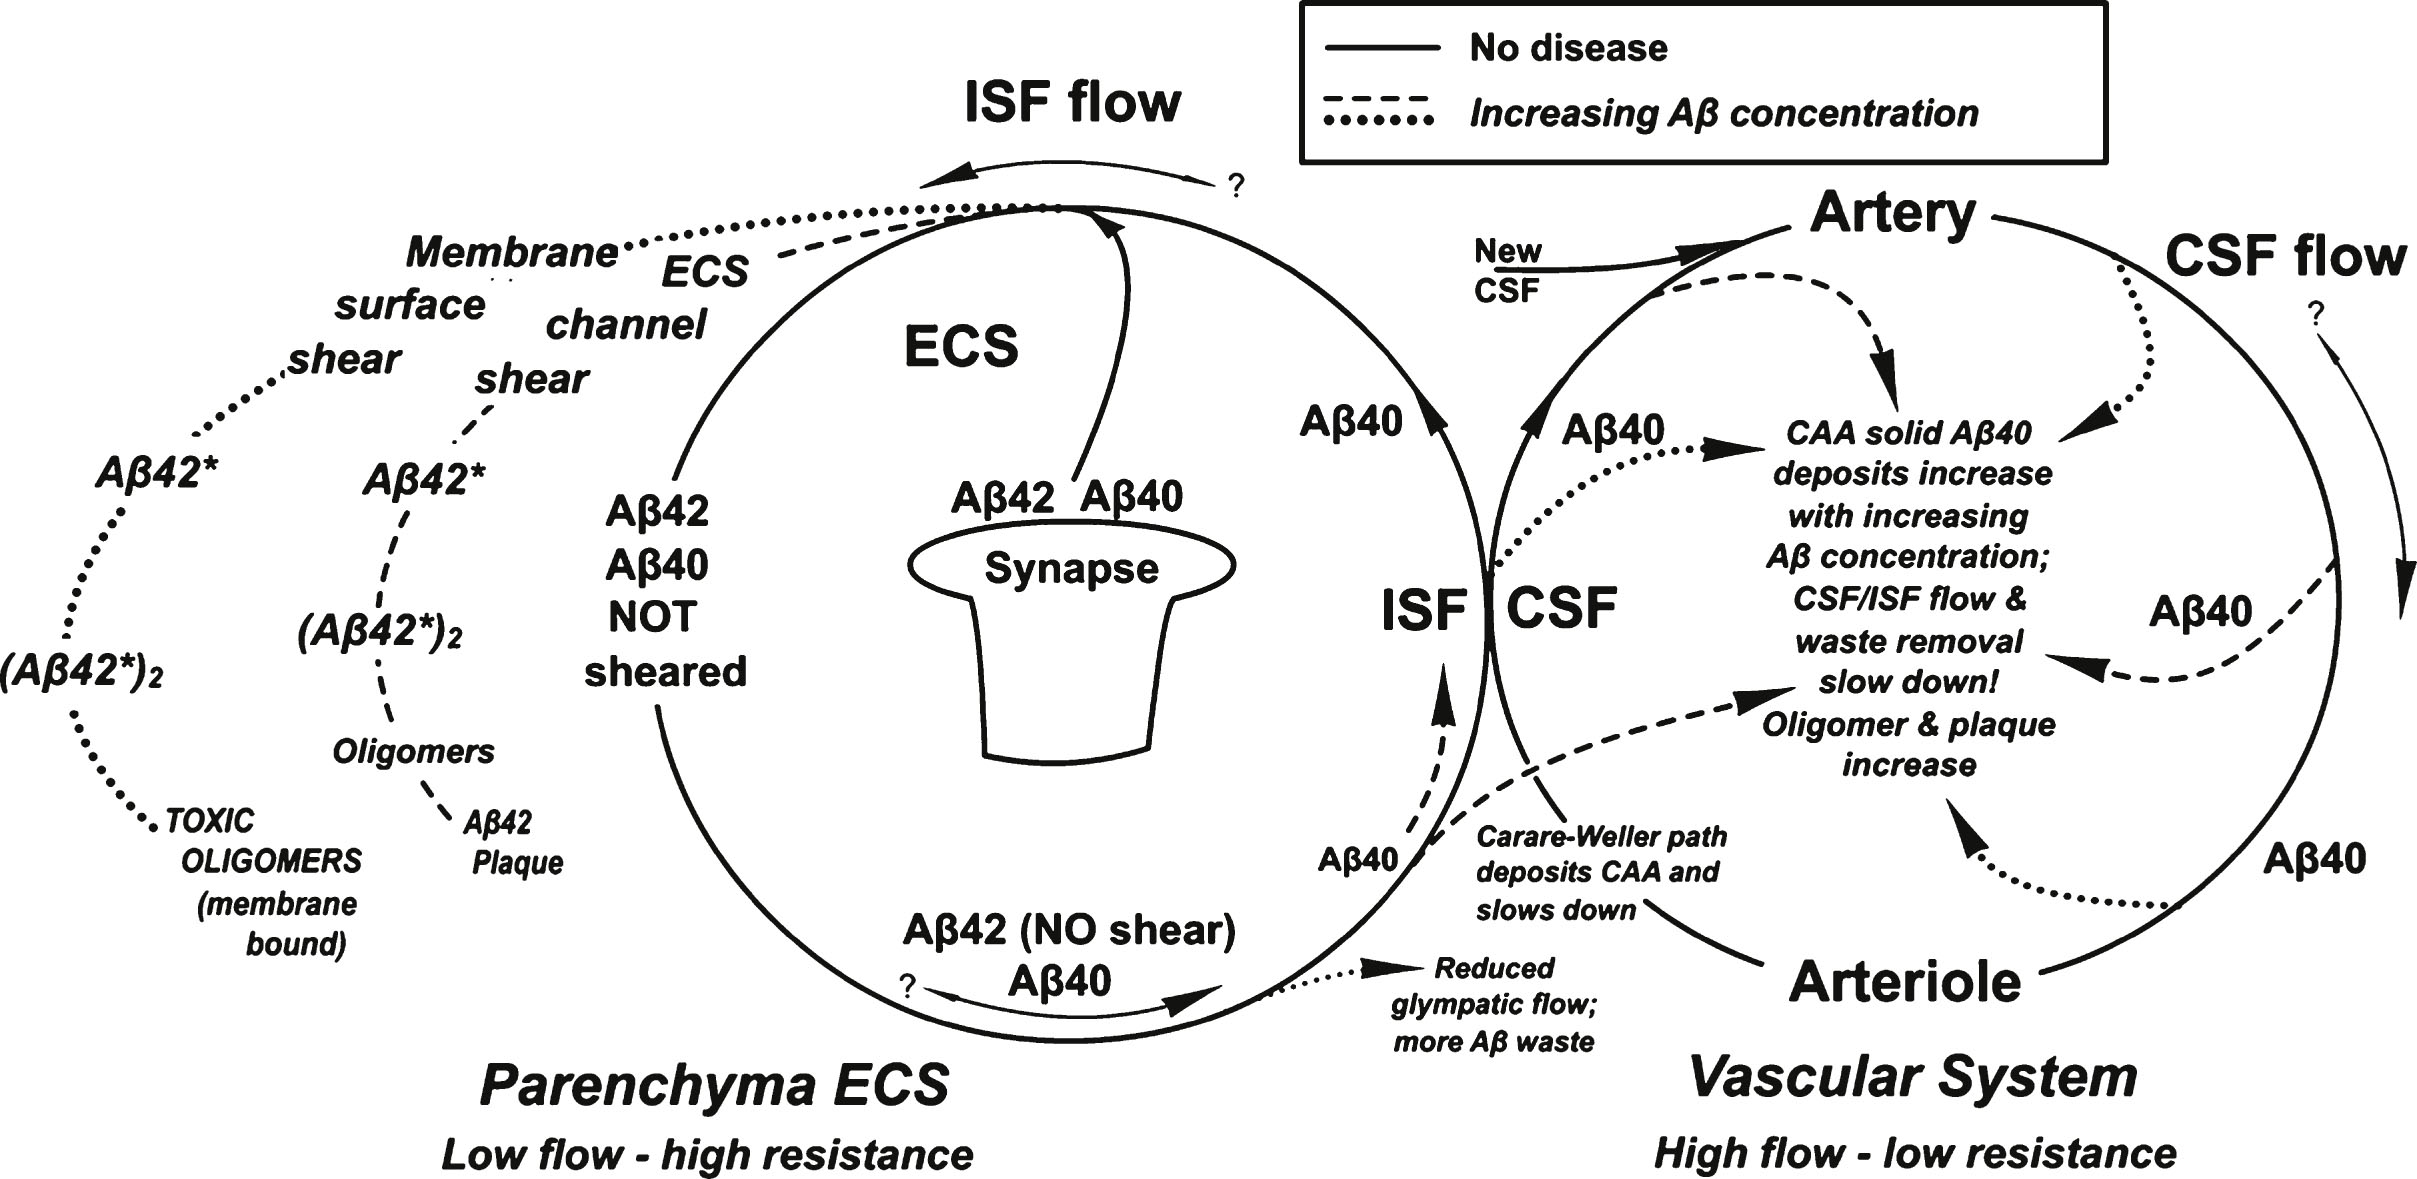 Summary of the processes described in this paper shows two cycles that merge at the ISF/CSF interface. The solid lines represent the processes without disease. Dashed and dotted lines are those processes occurring with AD. The dashed line represents the “non-wall” lower energy Aβ* aggregate formation process and the dotted line represents the results of the higher energy Aβ* “wall” shear aggregate product (see text for definitions).